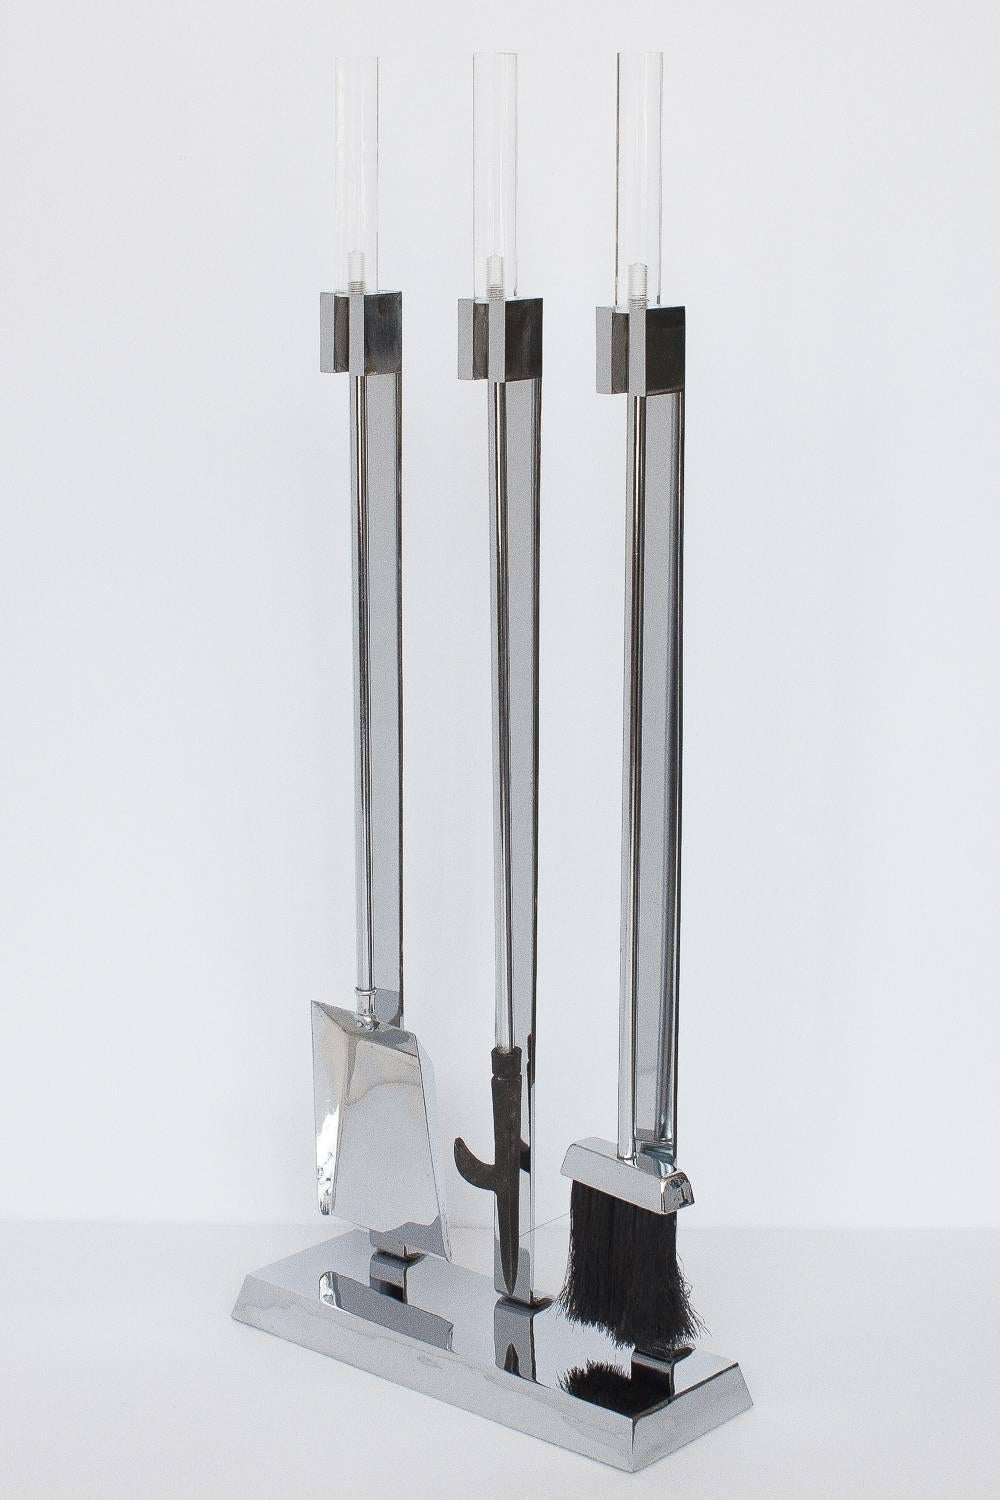 1970s, modernist Lucite and polished chrome fireplace tool set. Measures: 5.5" long, 1" diameter clear Lucite handles. Polished chrome rectangular base and three flat bar supports. Very good condition with a couple of tiny chips to the